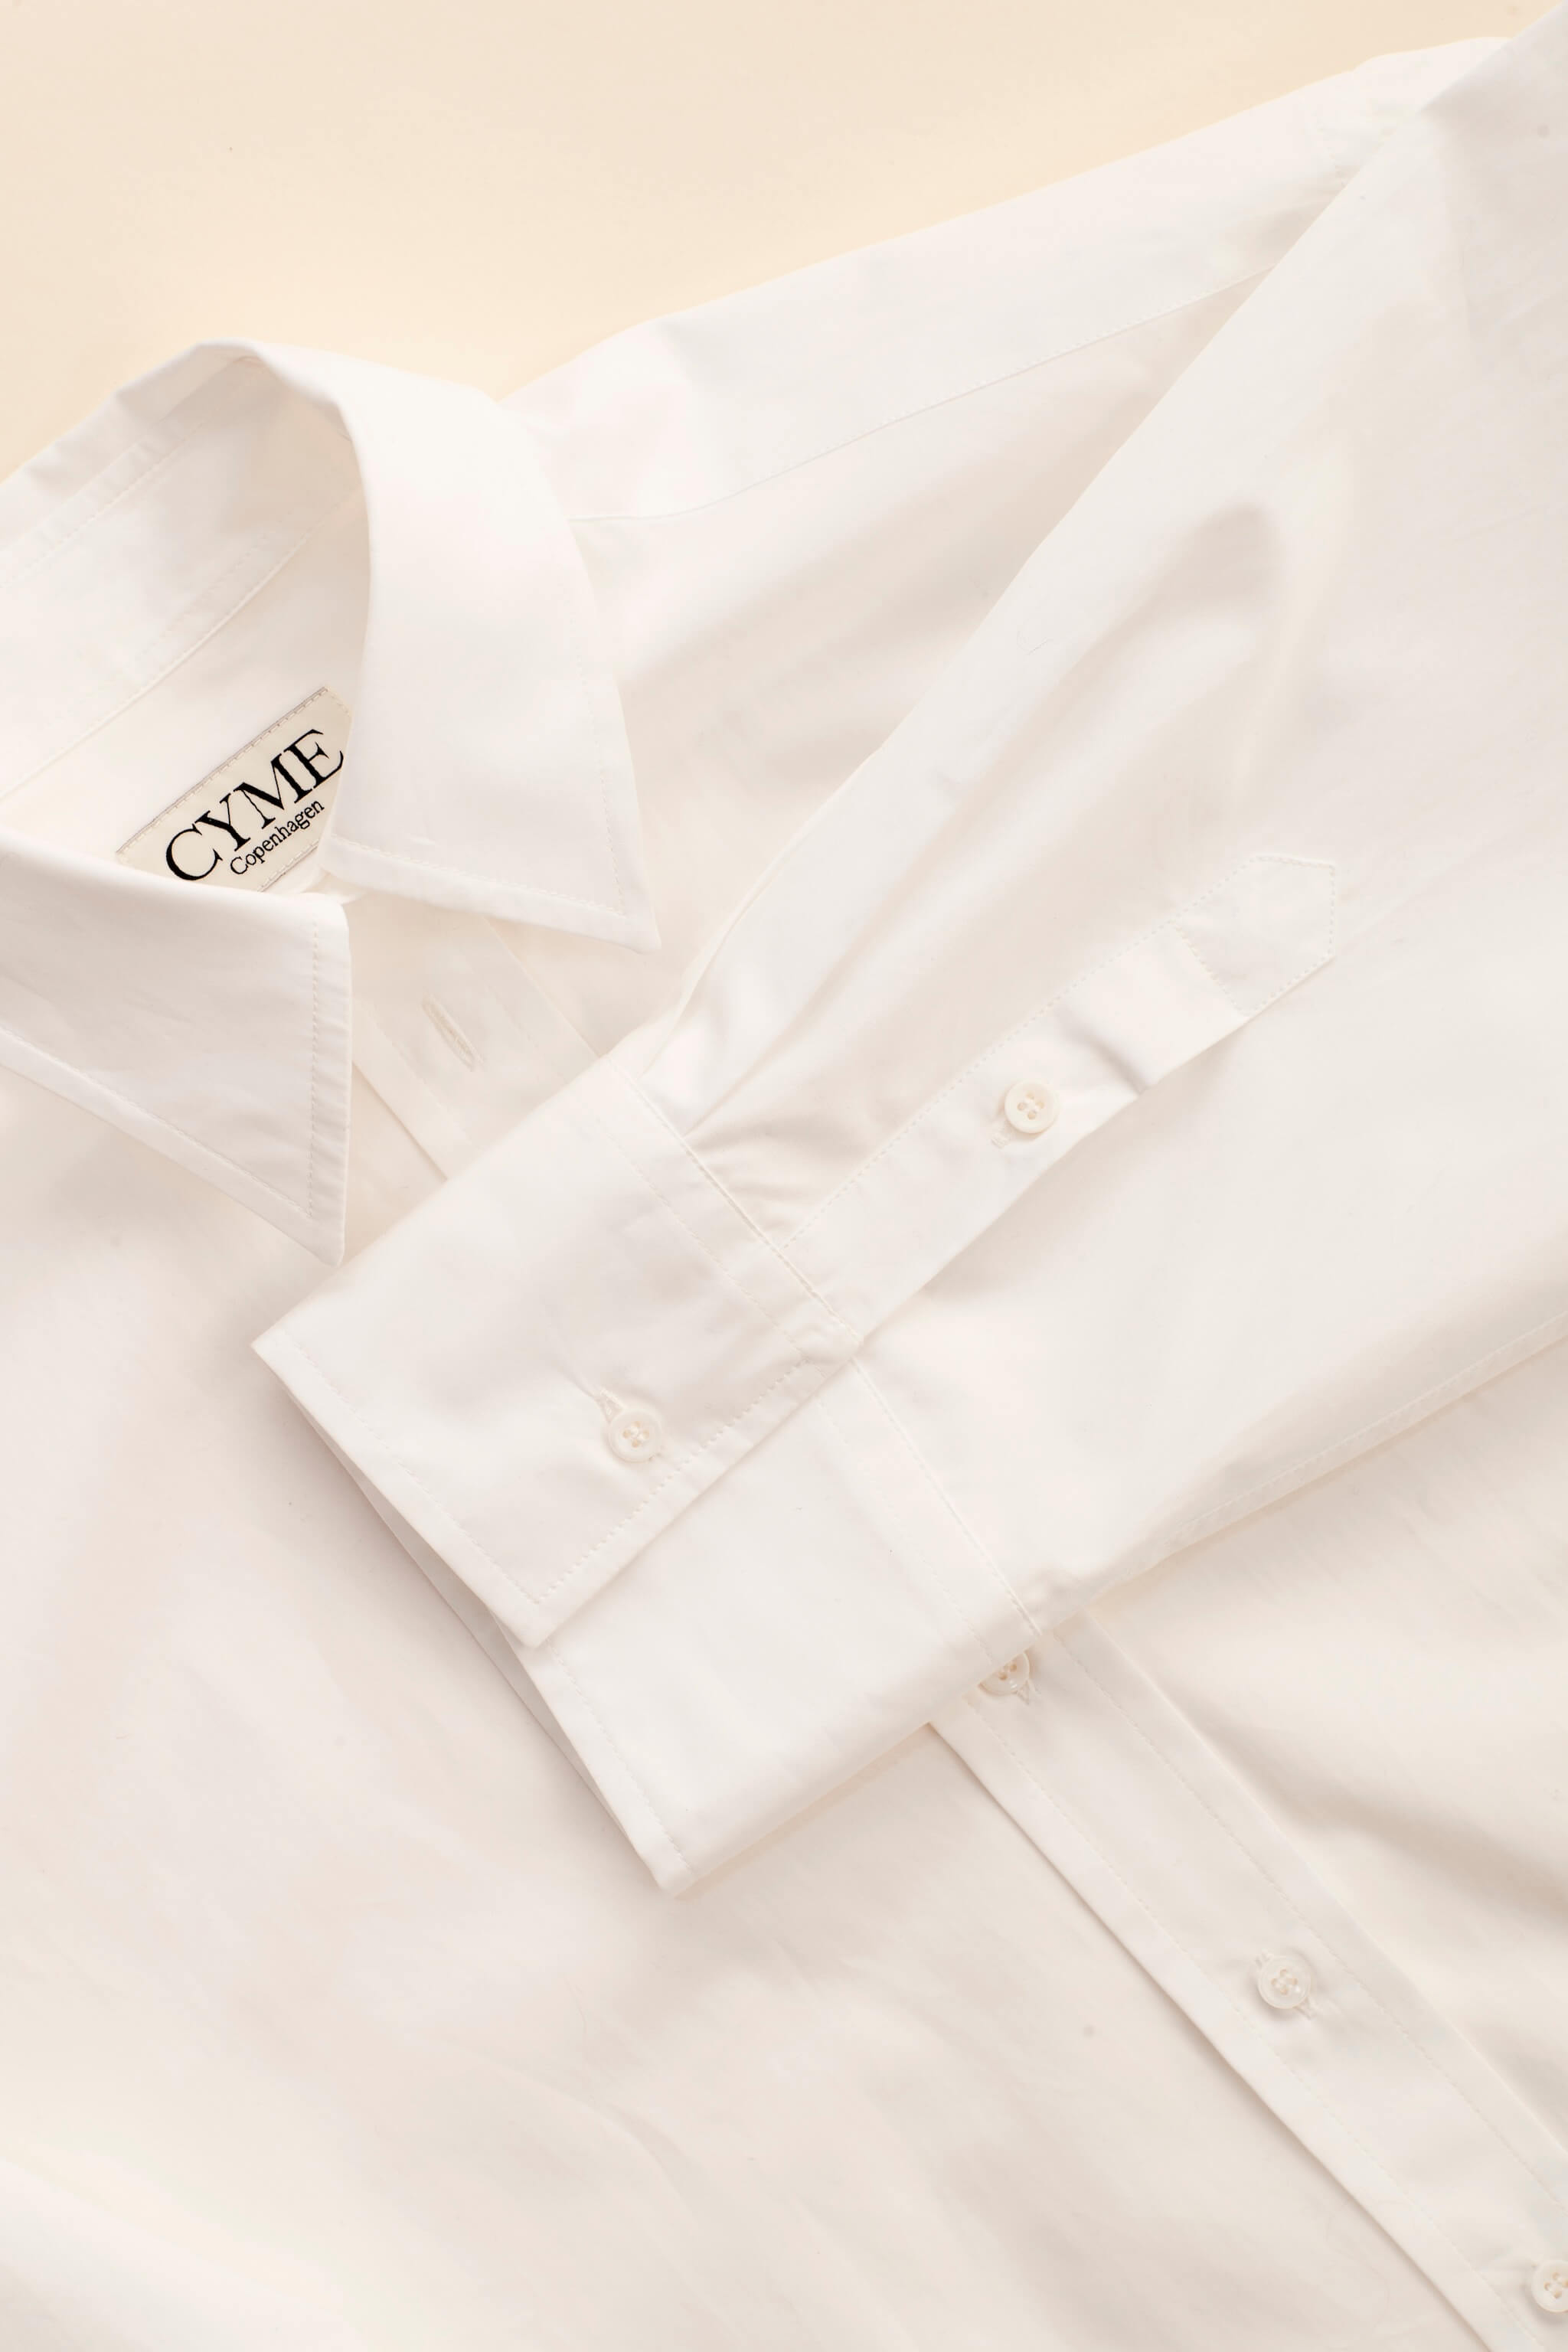 Detail of Cyme Copenhagen's minimalist white shirt with logo on the collar, embodying the clean and sustainable design of Scandinavian fashion.